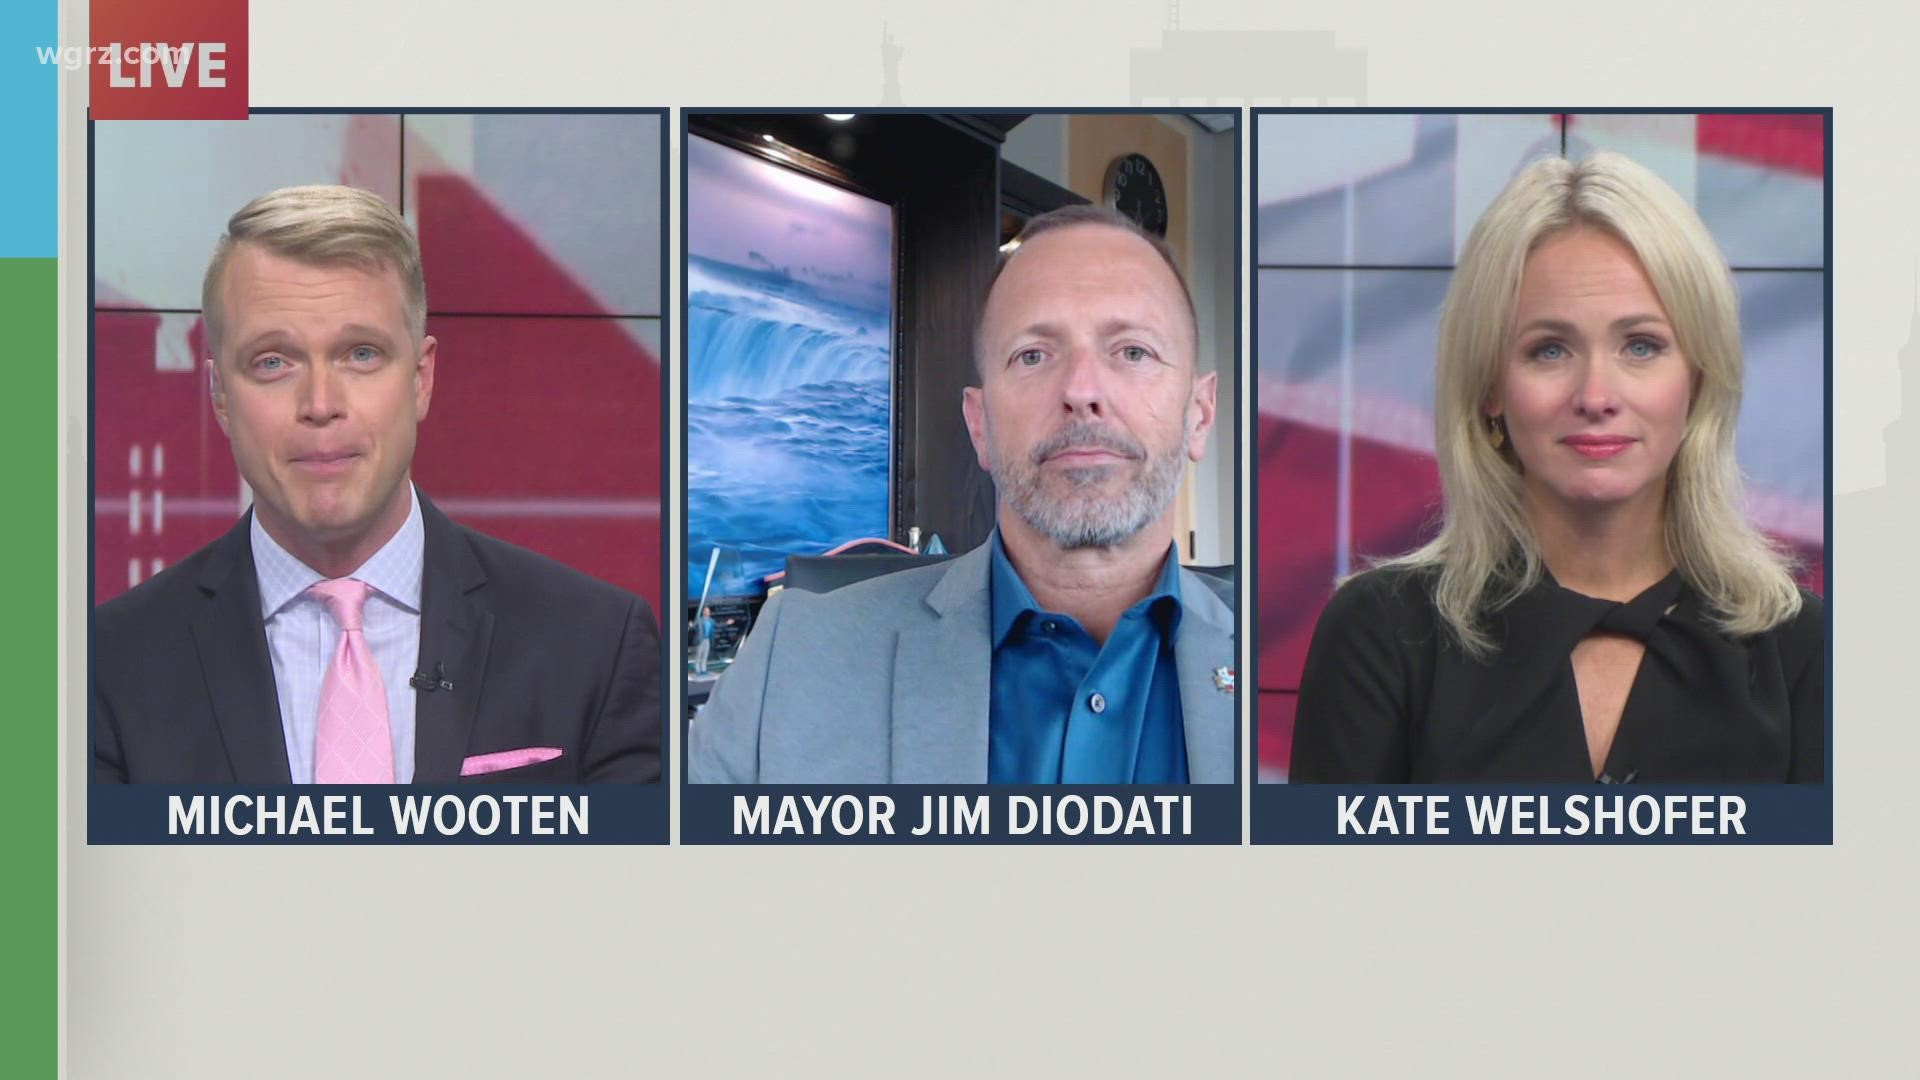 Niagara Falls, Ontario Mayor Jim Diodati joins our Town Hall to discuss the reopening of the U.S.-Canada border.